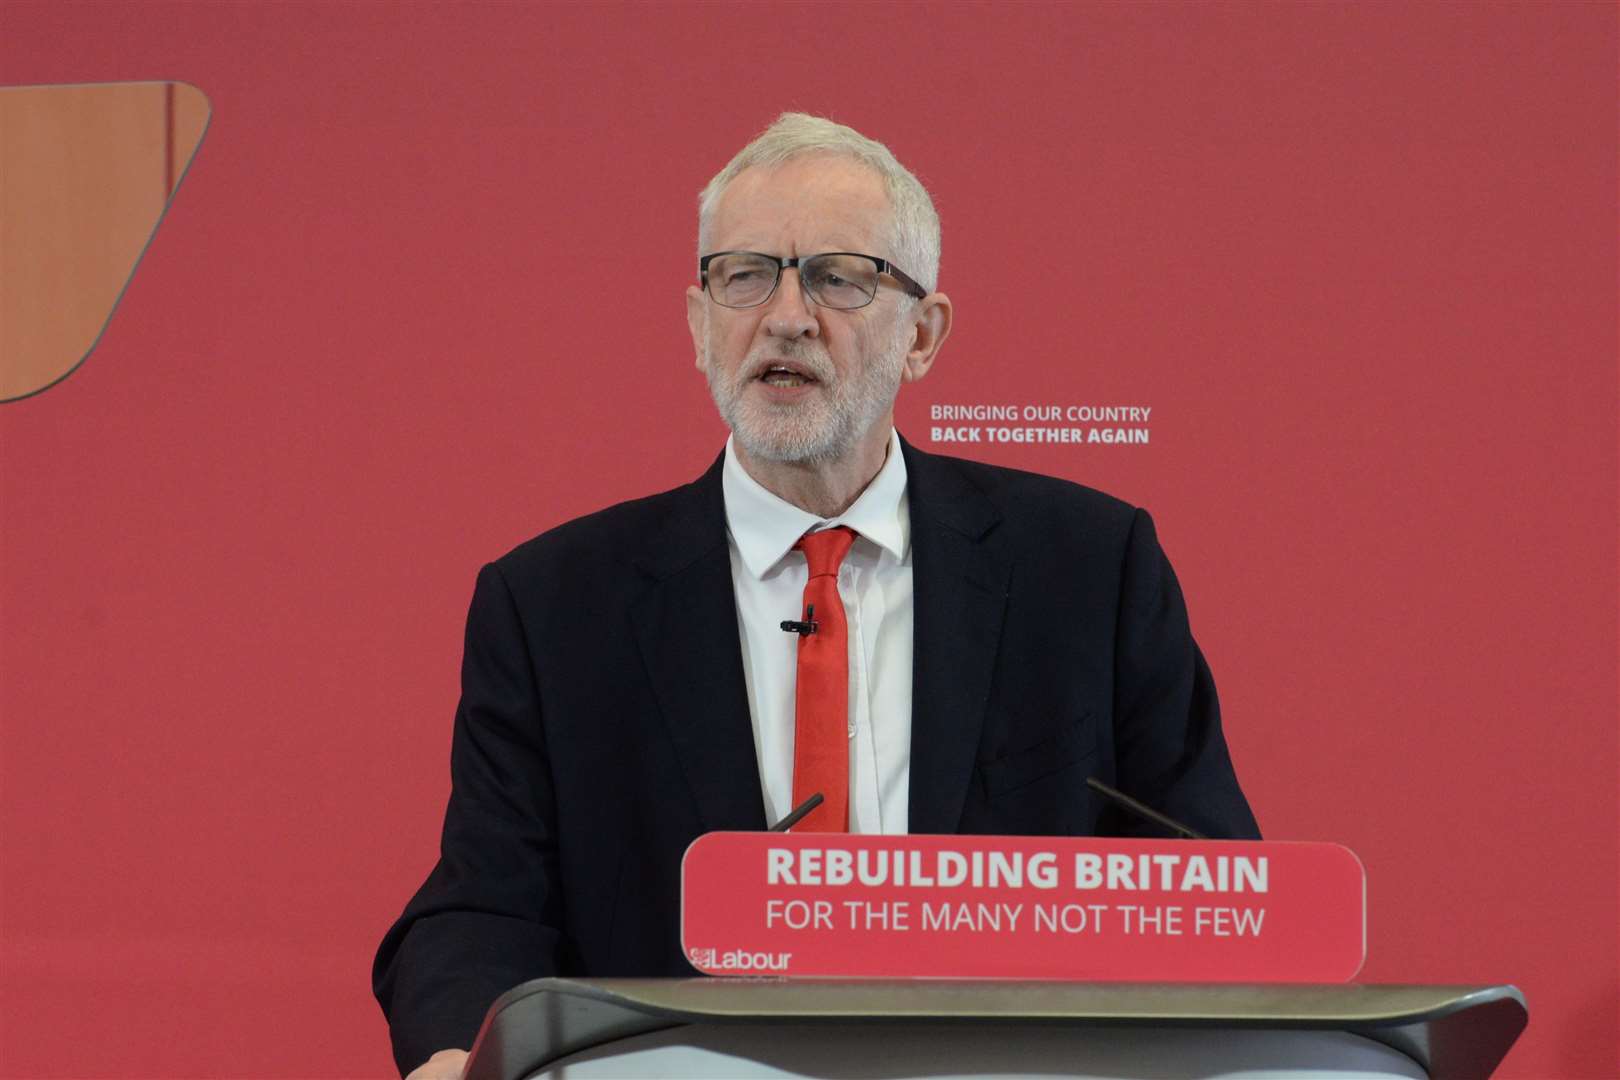 Jeremy Corbyn is facing calls to step down